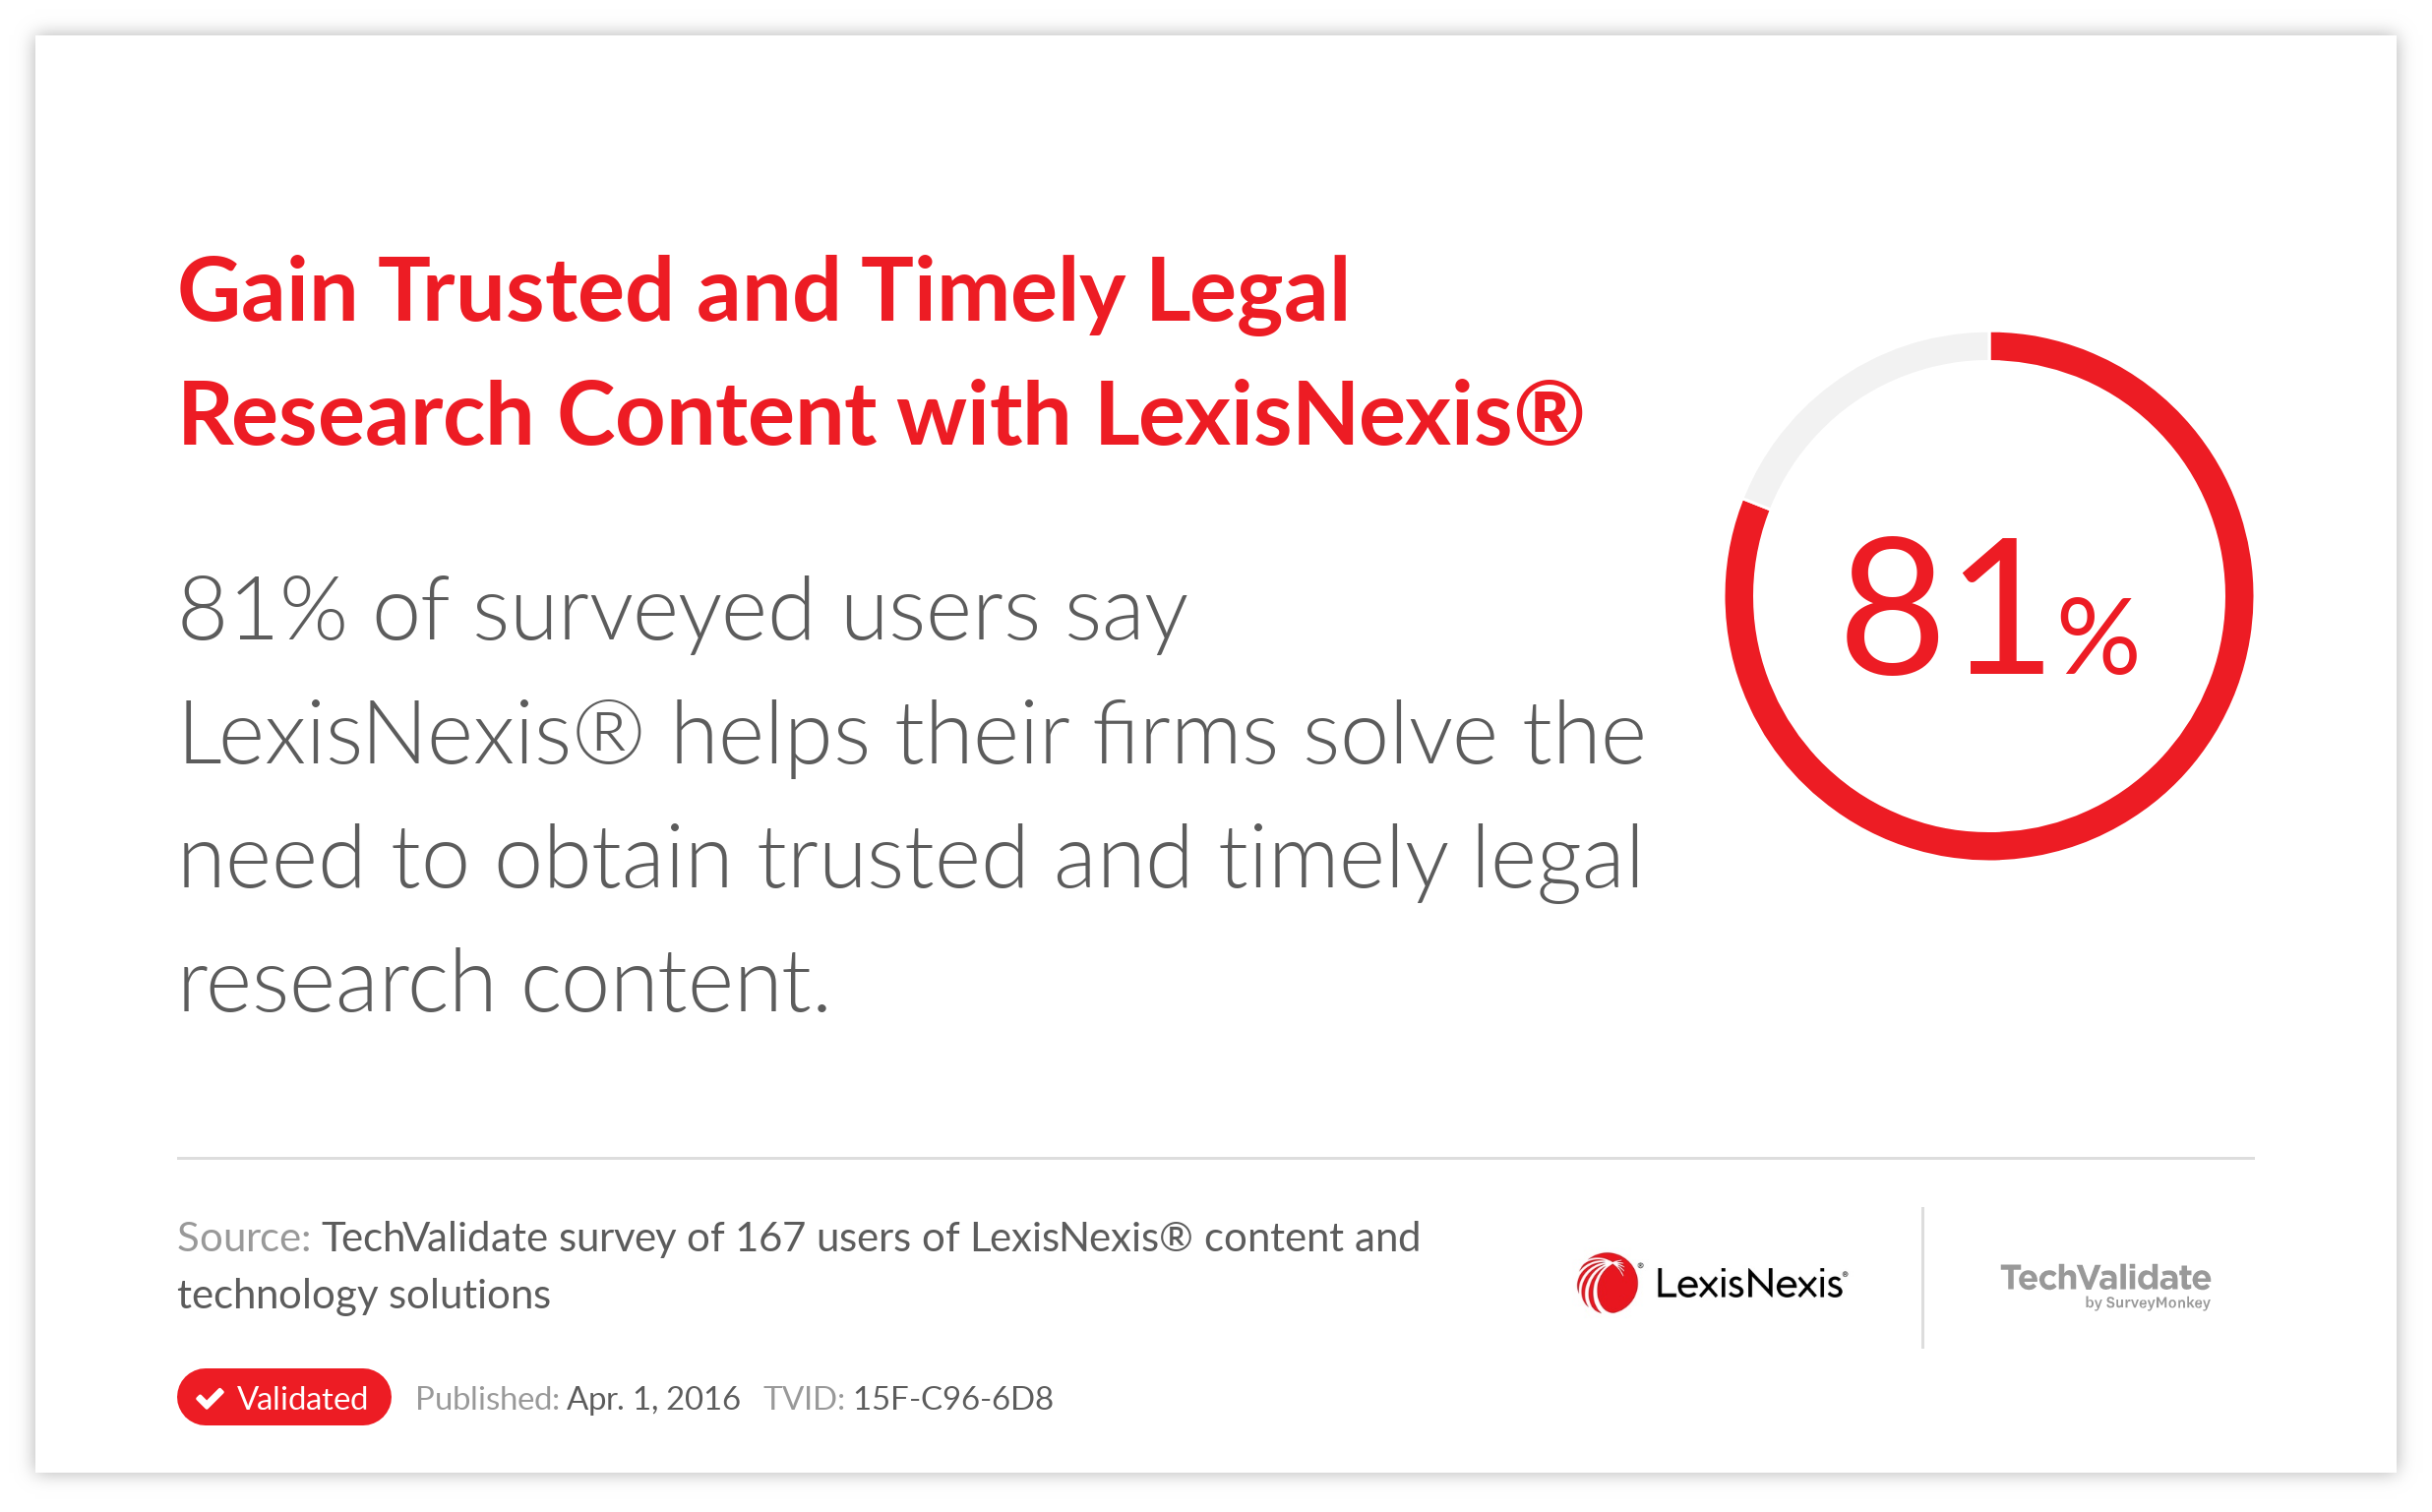 Gain Trusted and Timely Legal Research Content with LexisNexis®